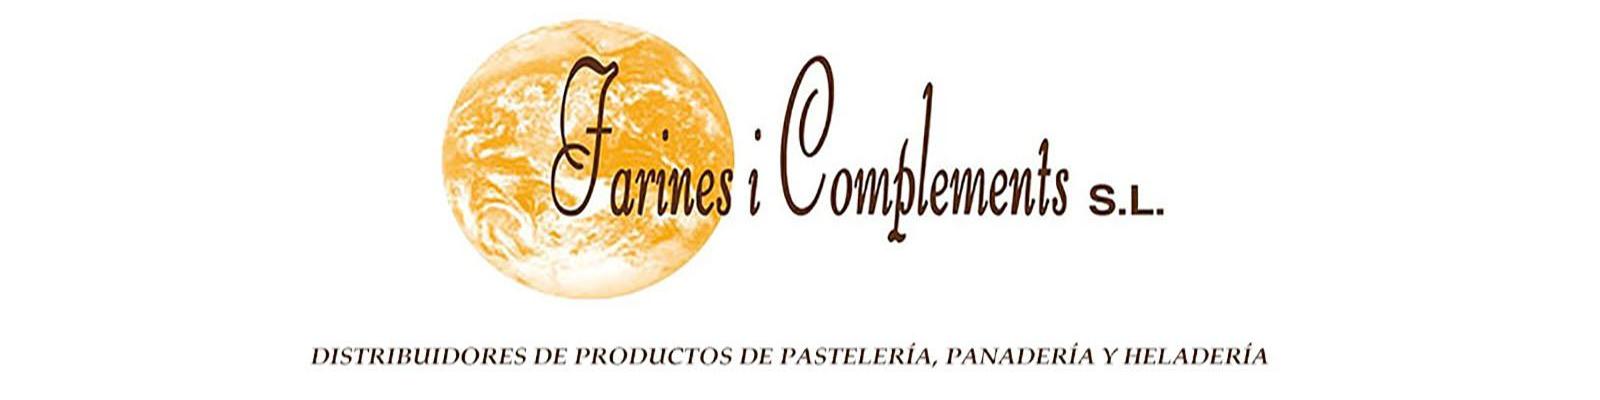 Farines i Complements s.l